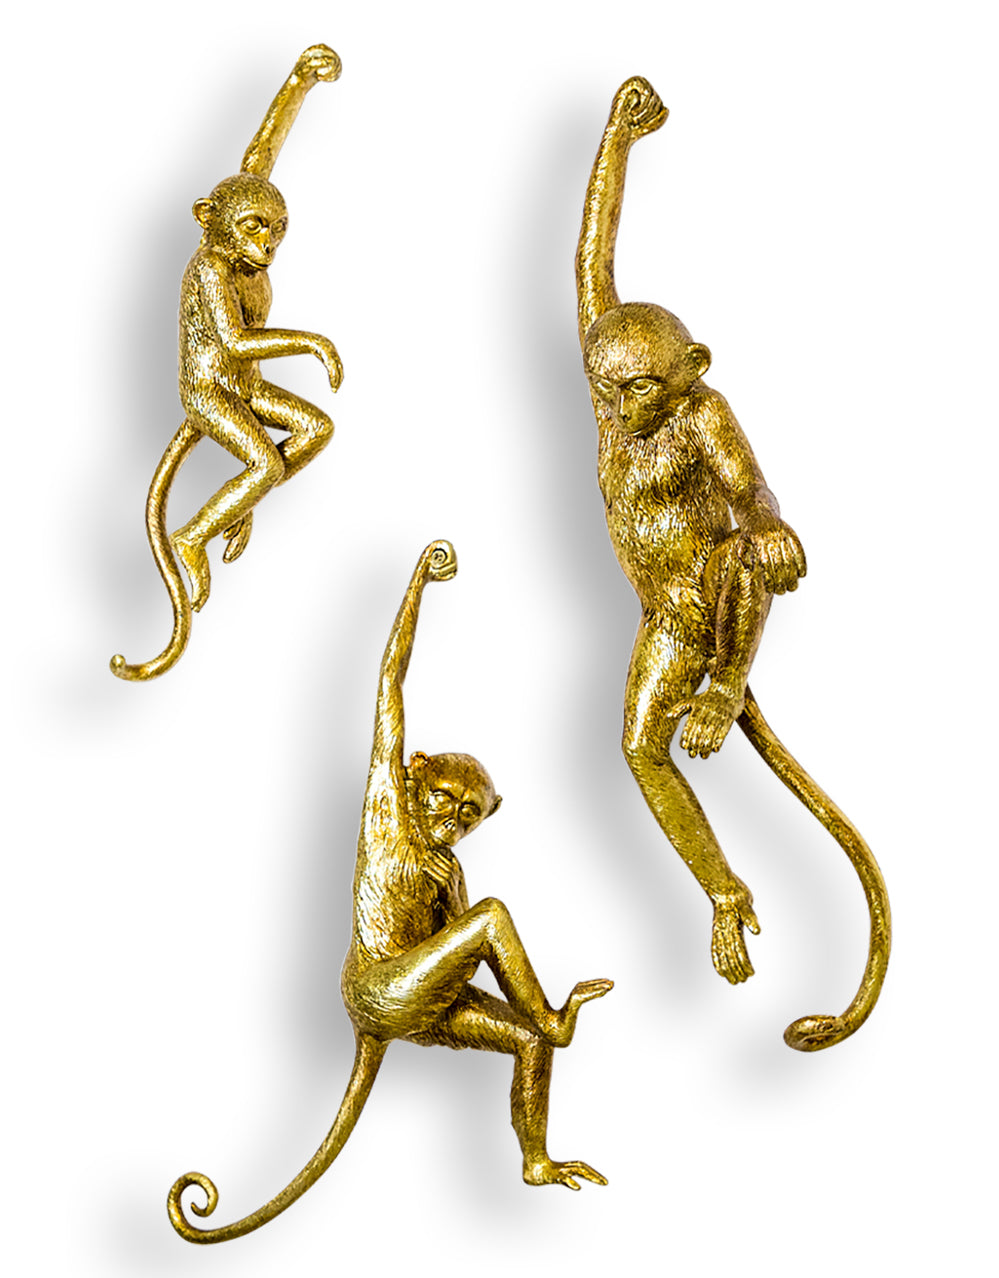 Antique Gold set of 3 Monkey Wall Figures